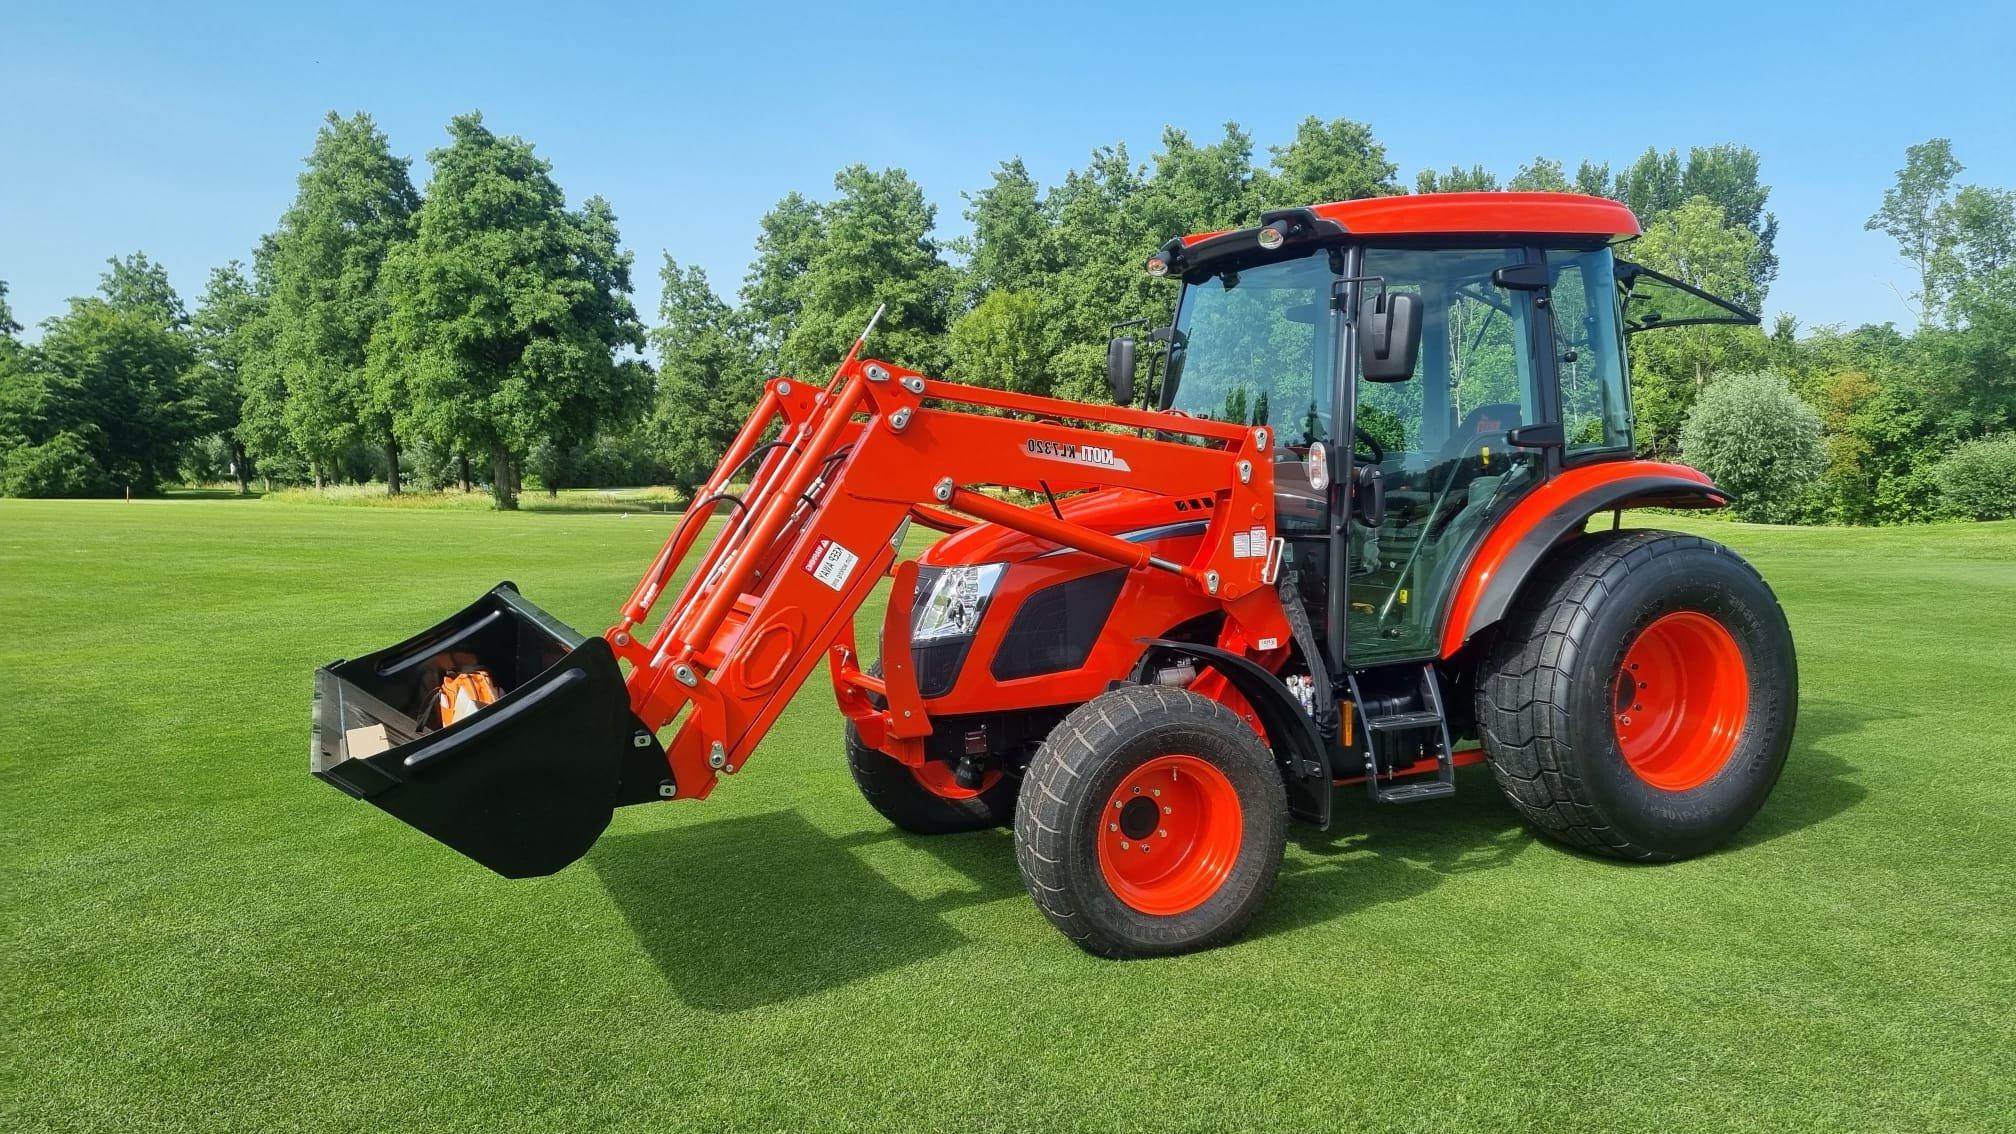 Kioti compact tractor for golf course maintenance